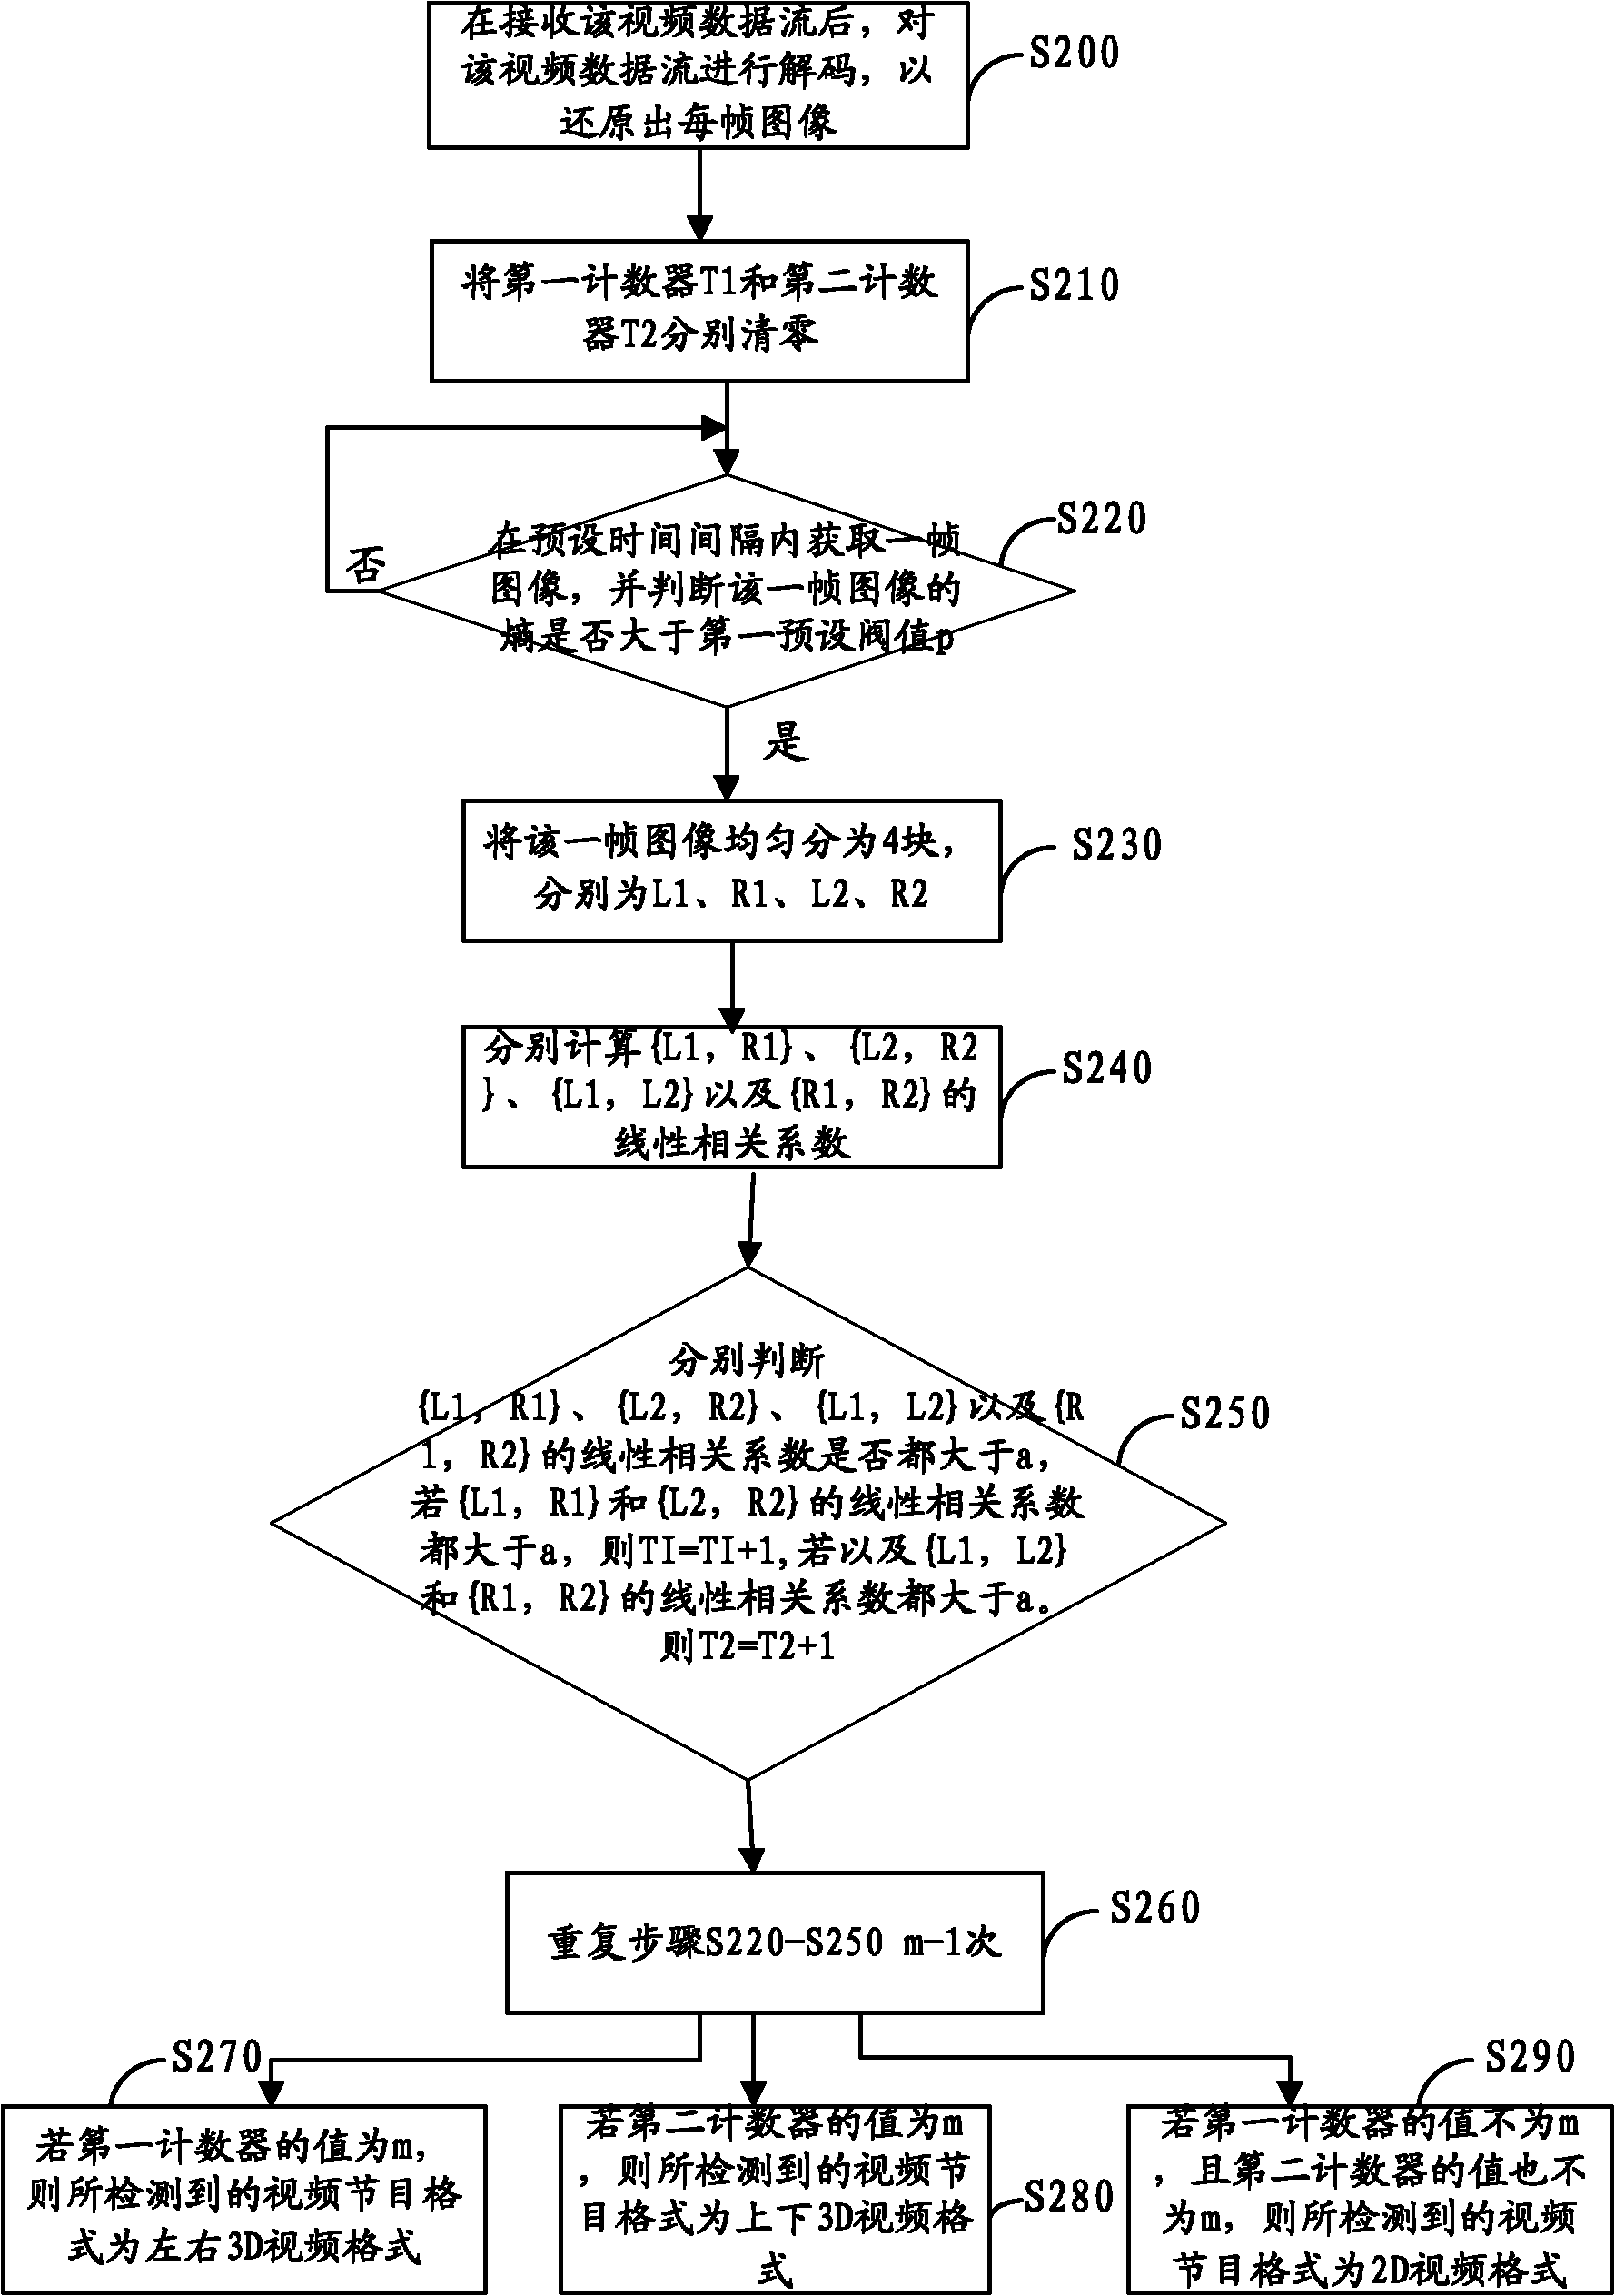 Method for automatically detecting 3DTV video program format